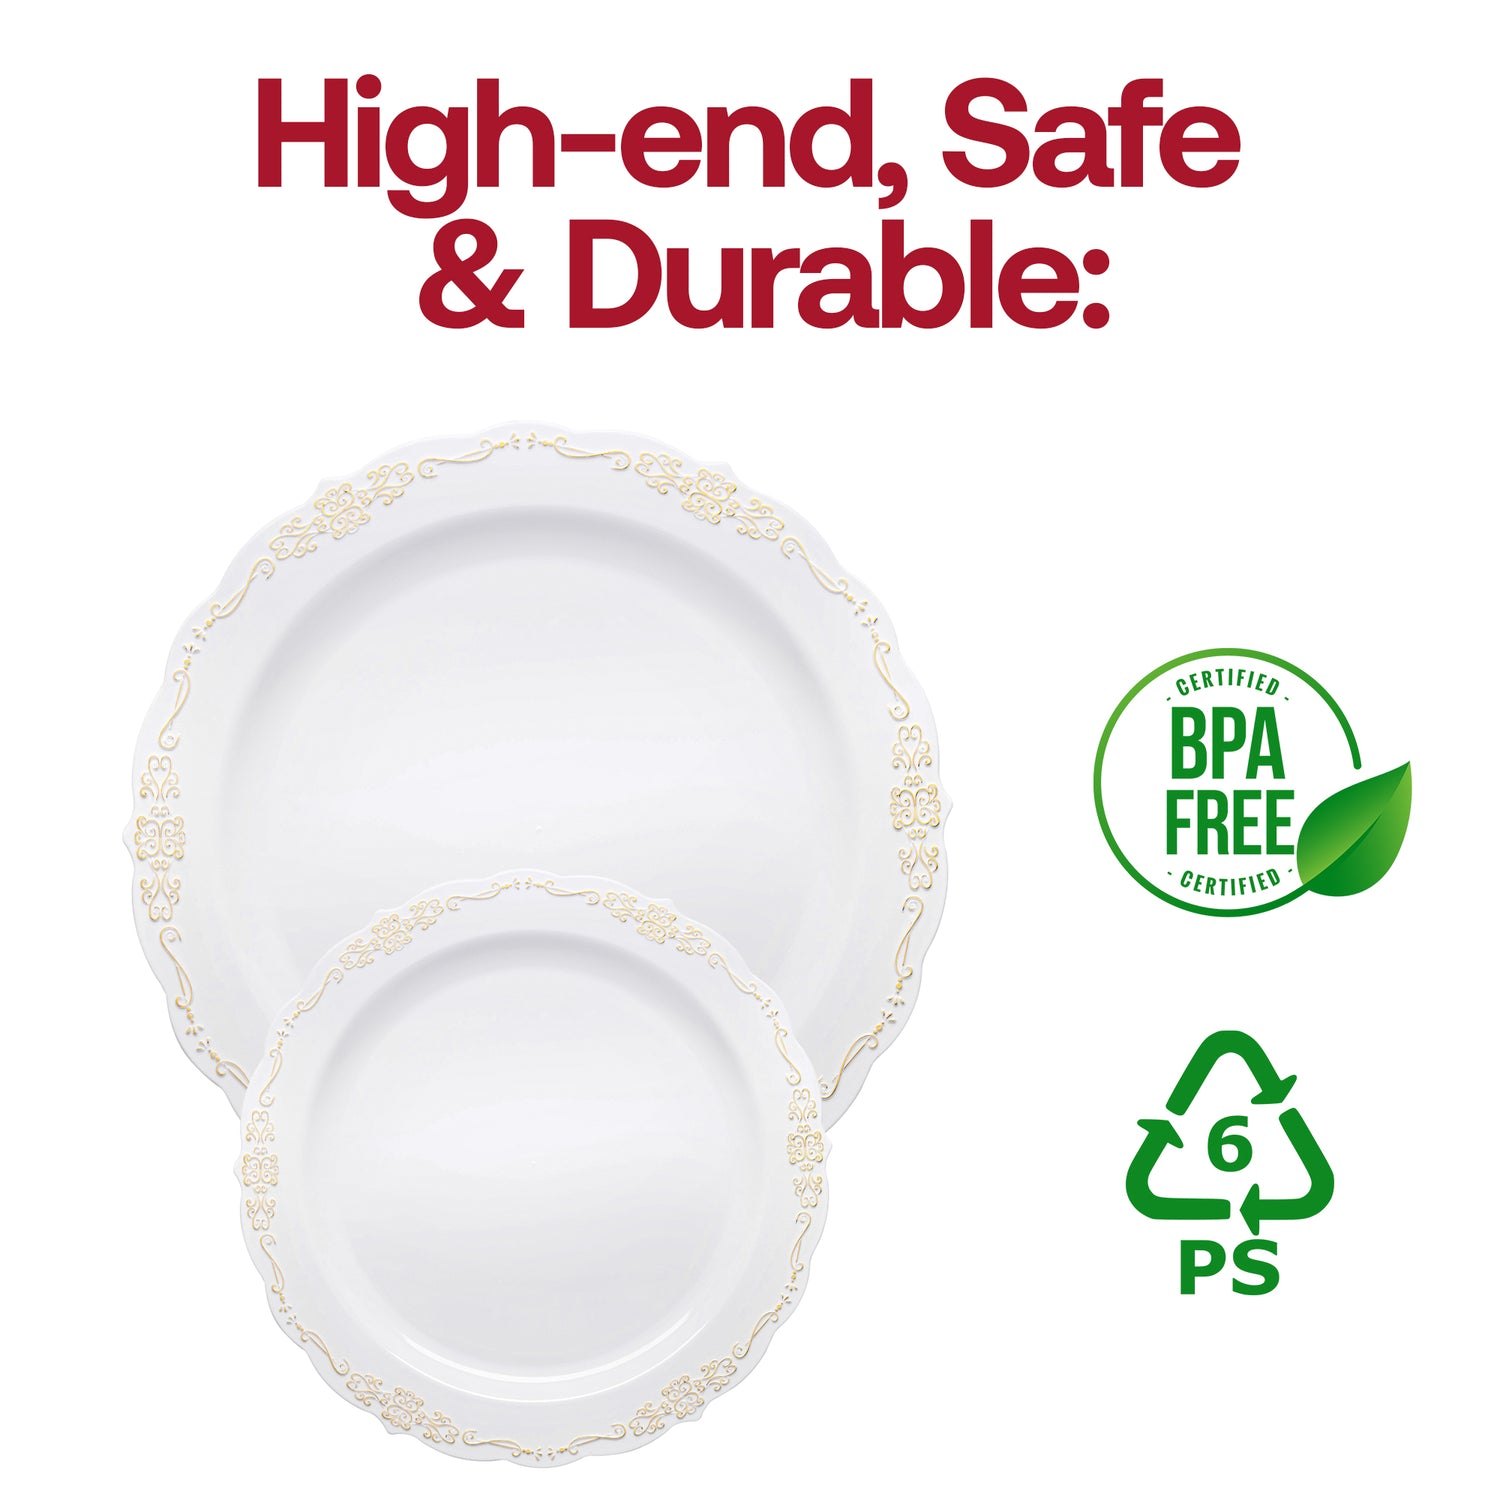 White with Gold Vintage Rim Round Disposable Plastic Appetizer/Salad Plates (7.5") BPA | The Kaya Collection